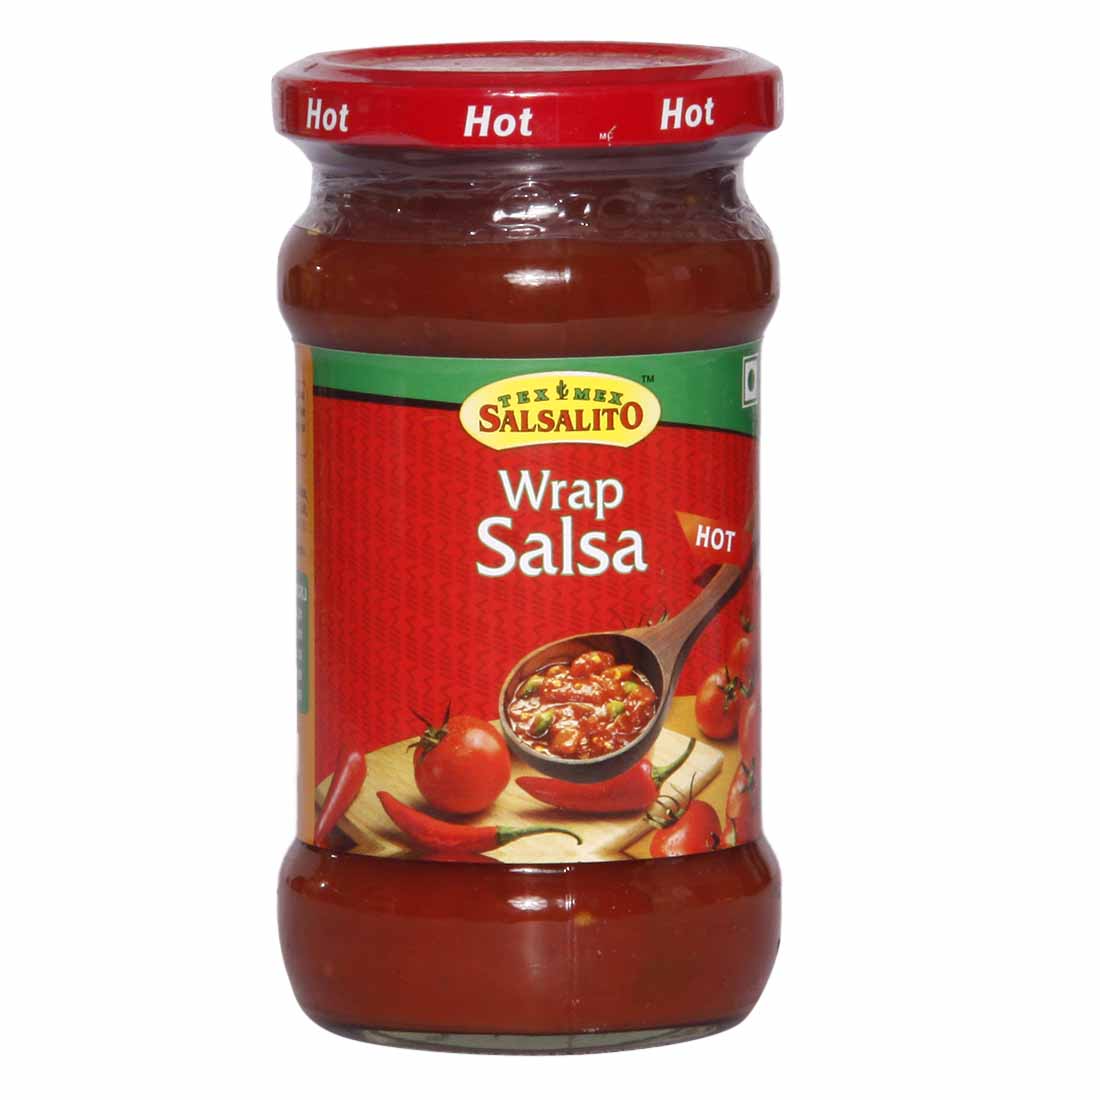 Buy Wrap Salsa Hot Sauce Online of Best Quality in India - Godrej ...